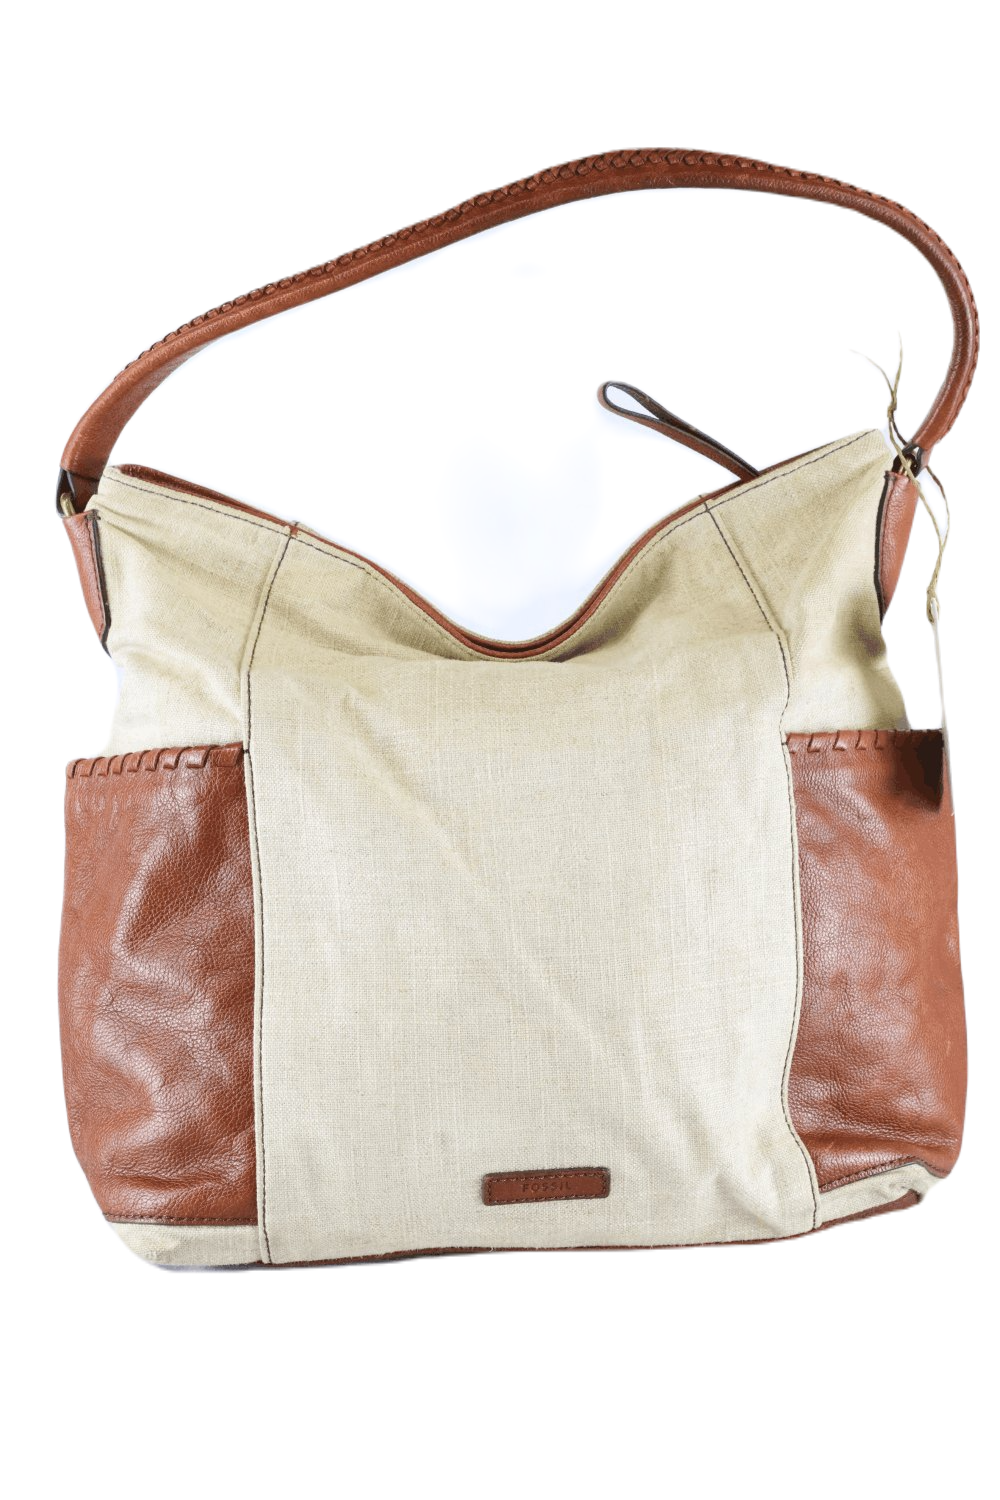 Fossil Brown And Beige Bag